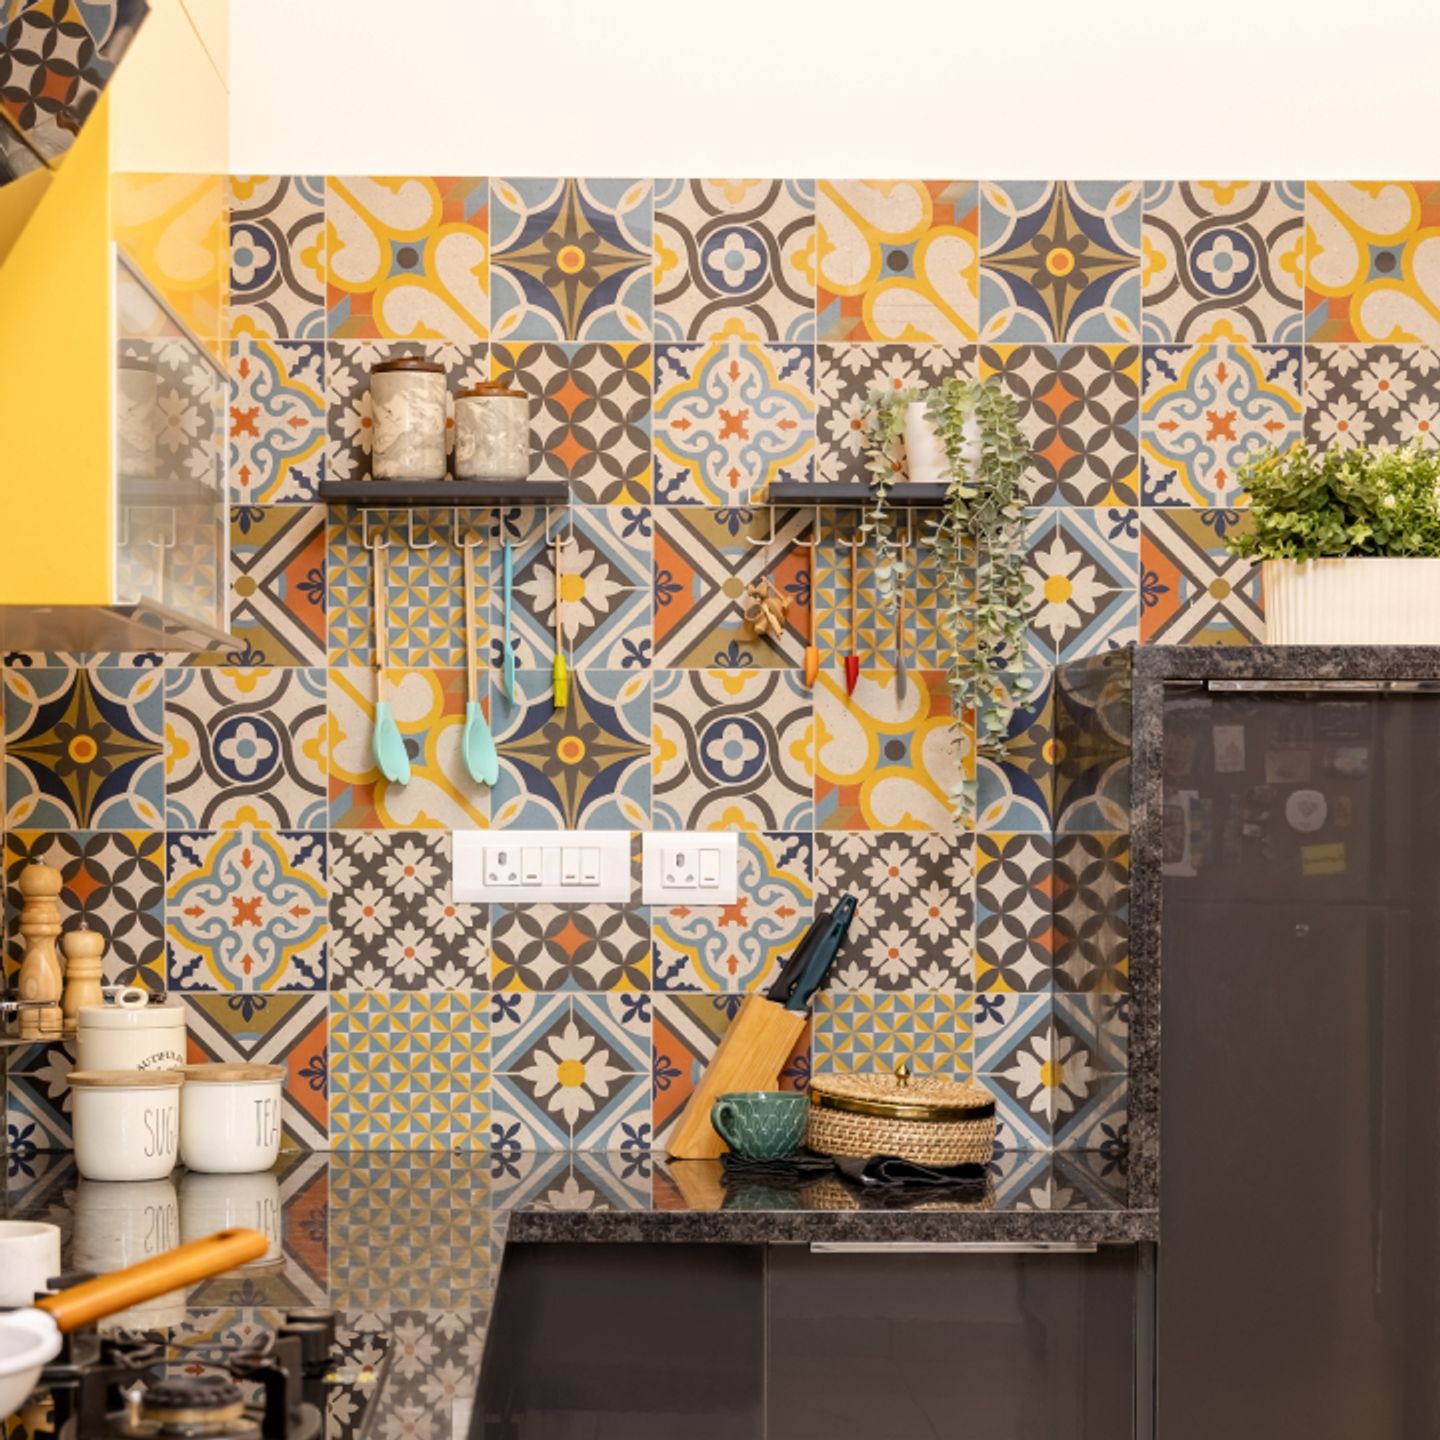 Kitchen Tiles With A Wall Dado - Livspace